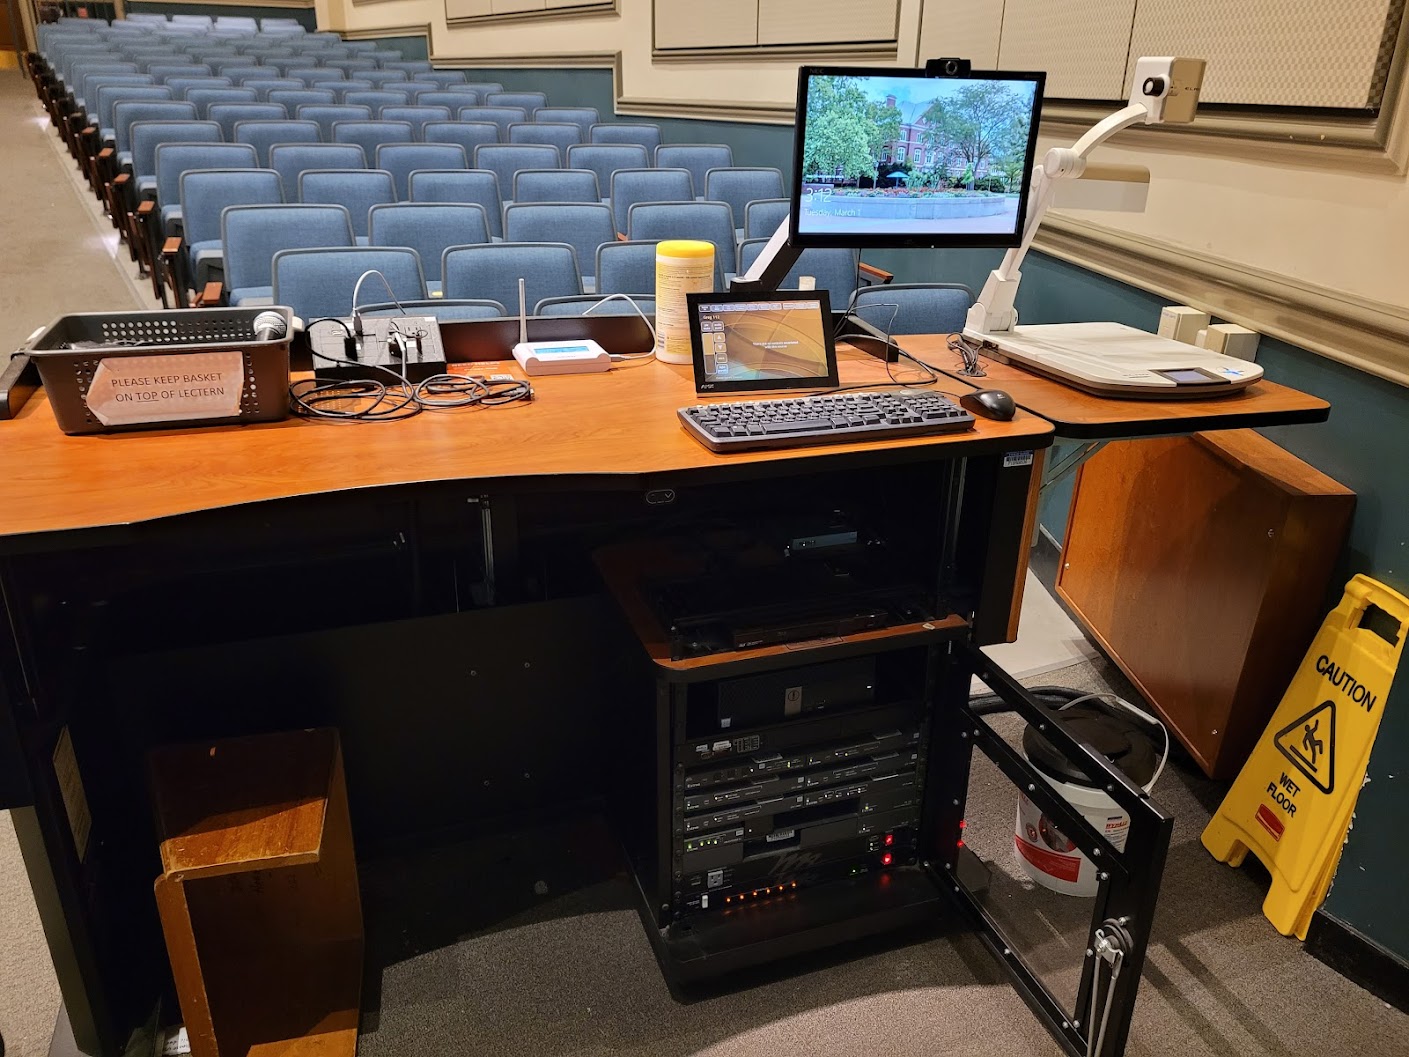 A view of the open cabinet with a computer monitor, HDMI inputs, a touch panel controller, document camera and audio visual rack.